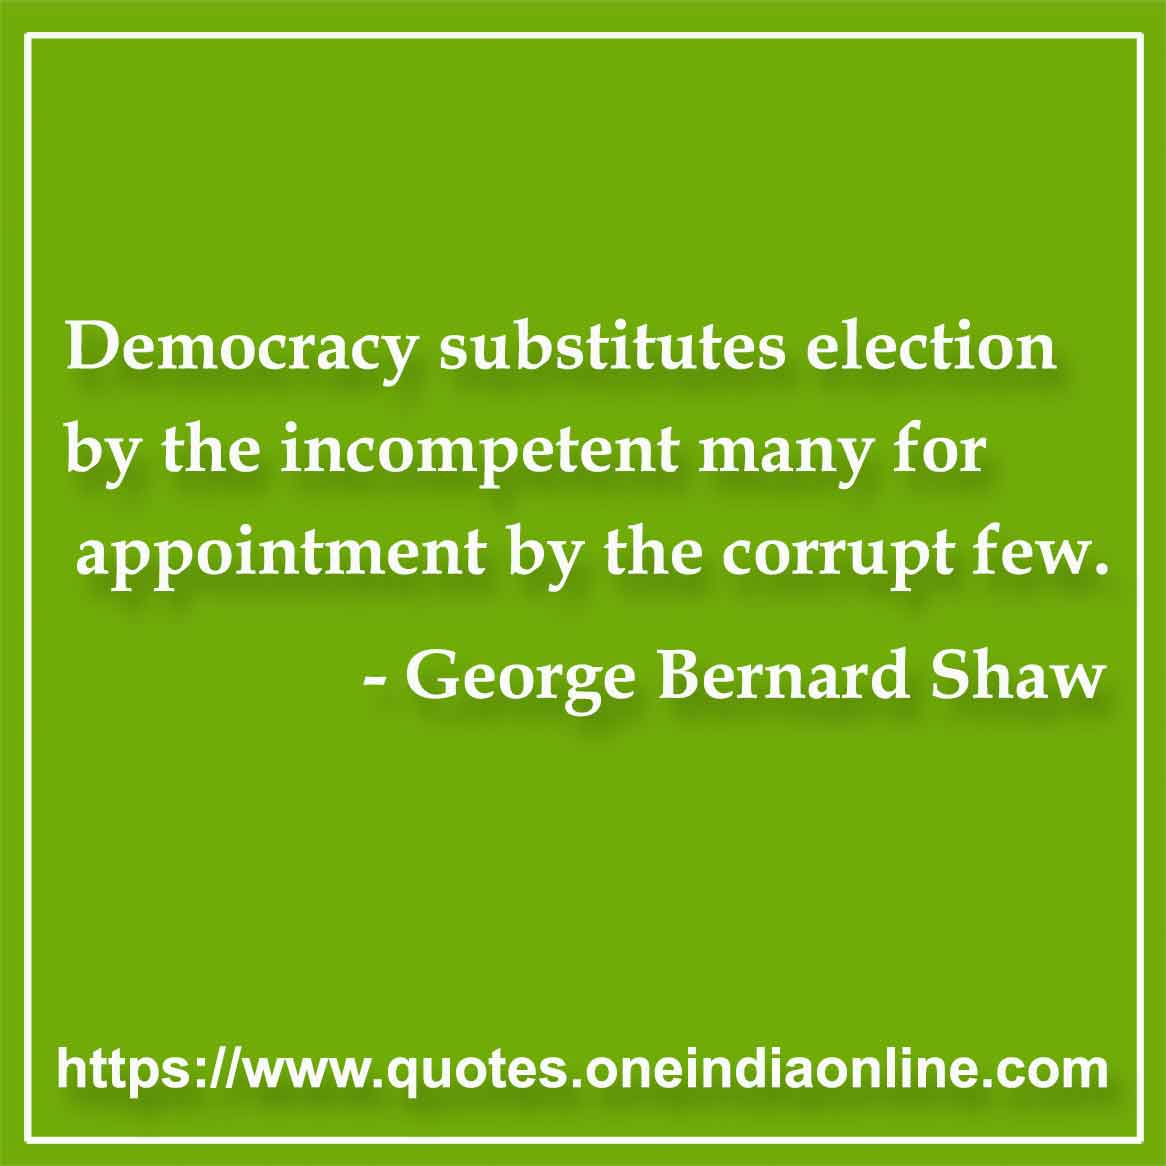 Democracy substitutes election by the incompetent many for appointment by the corrupt few.

- Democracy Quotes by George Bernard Shaw